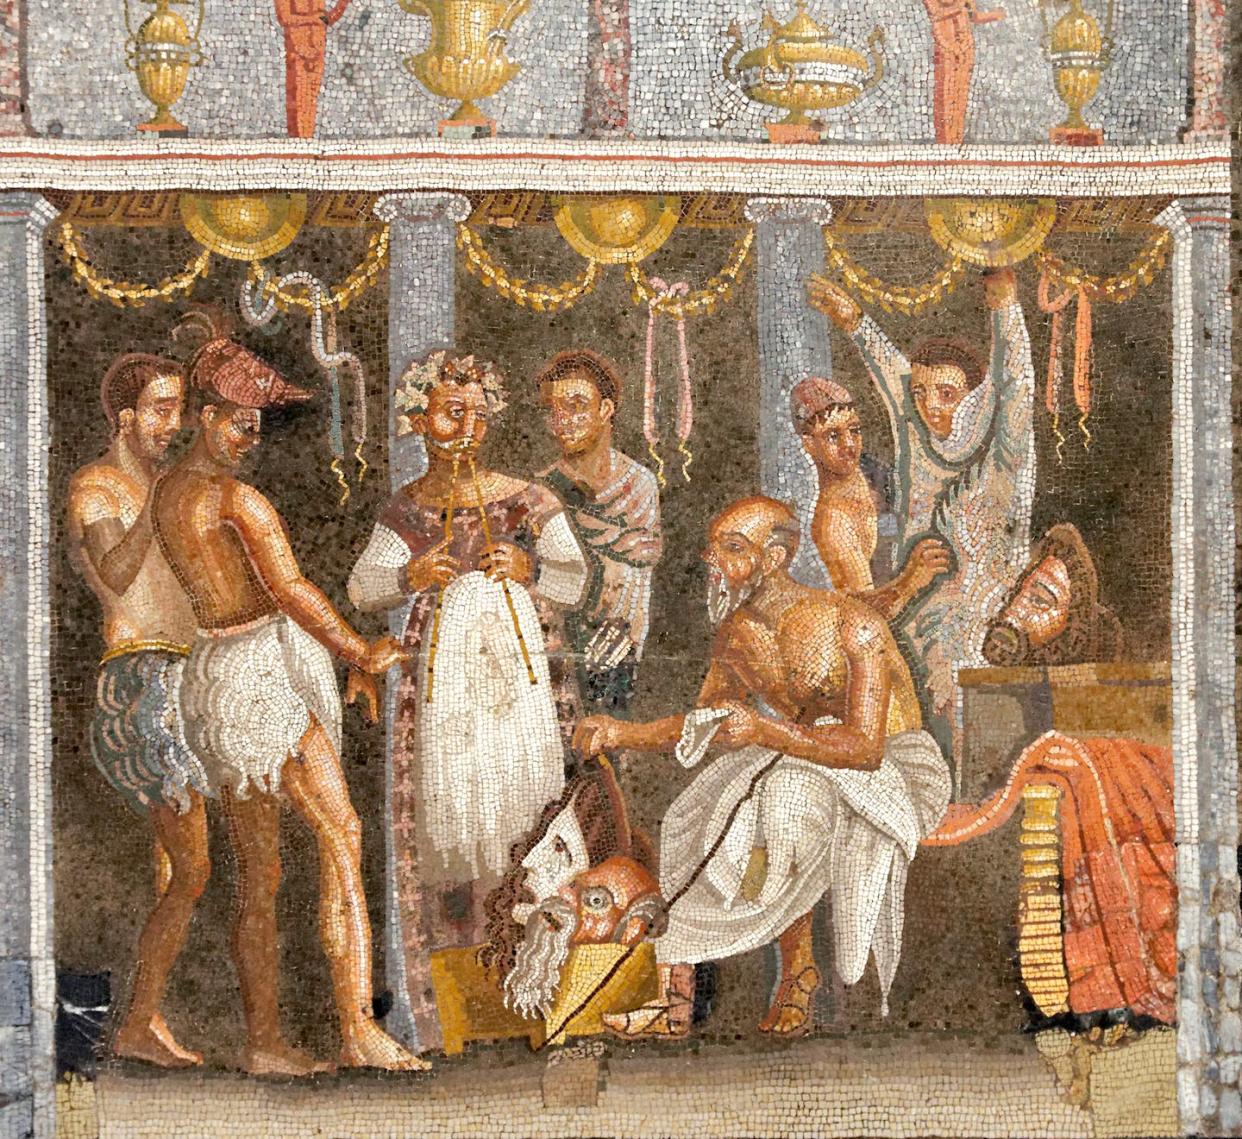 Preparation of actors for a satyric drama, from the House of the Tragic Poet, Pompeii. Wikimedia Commons